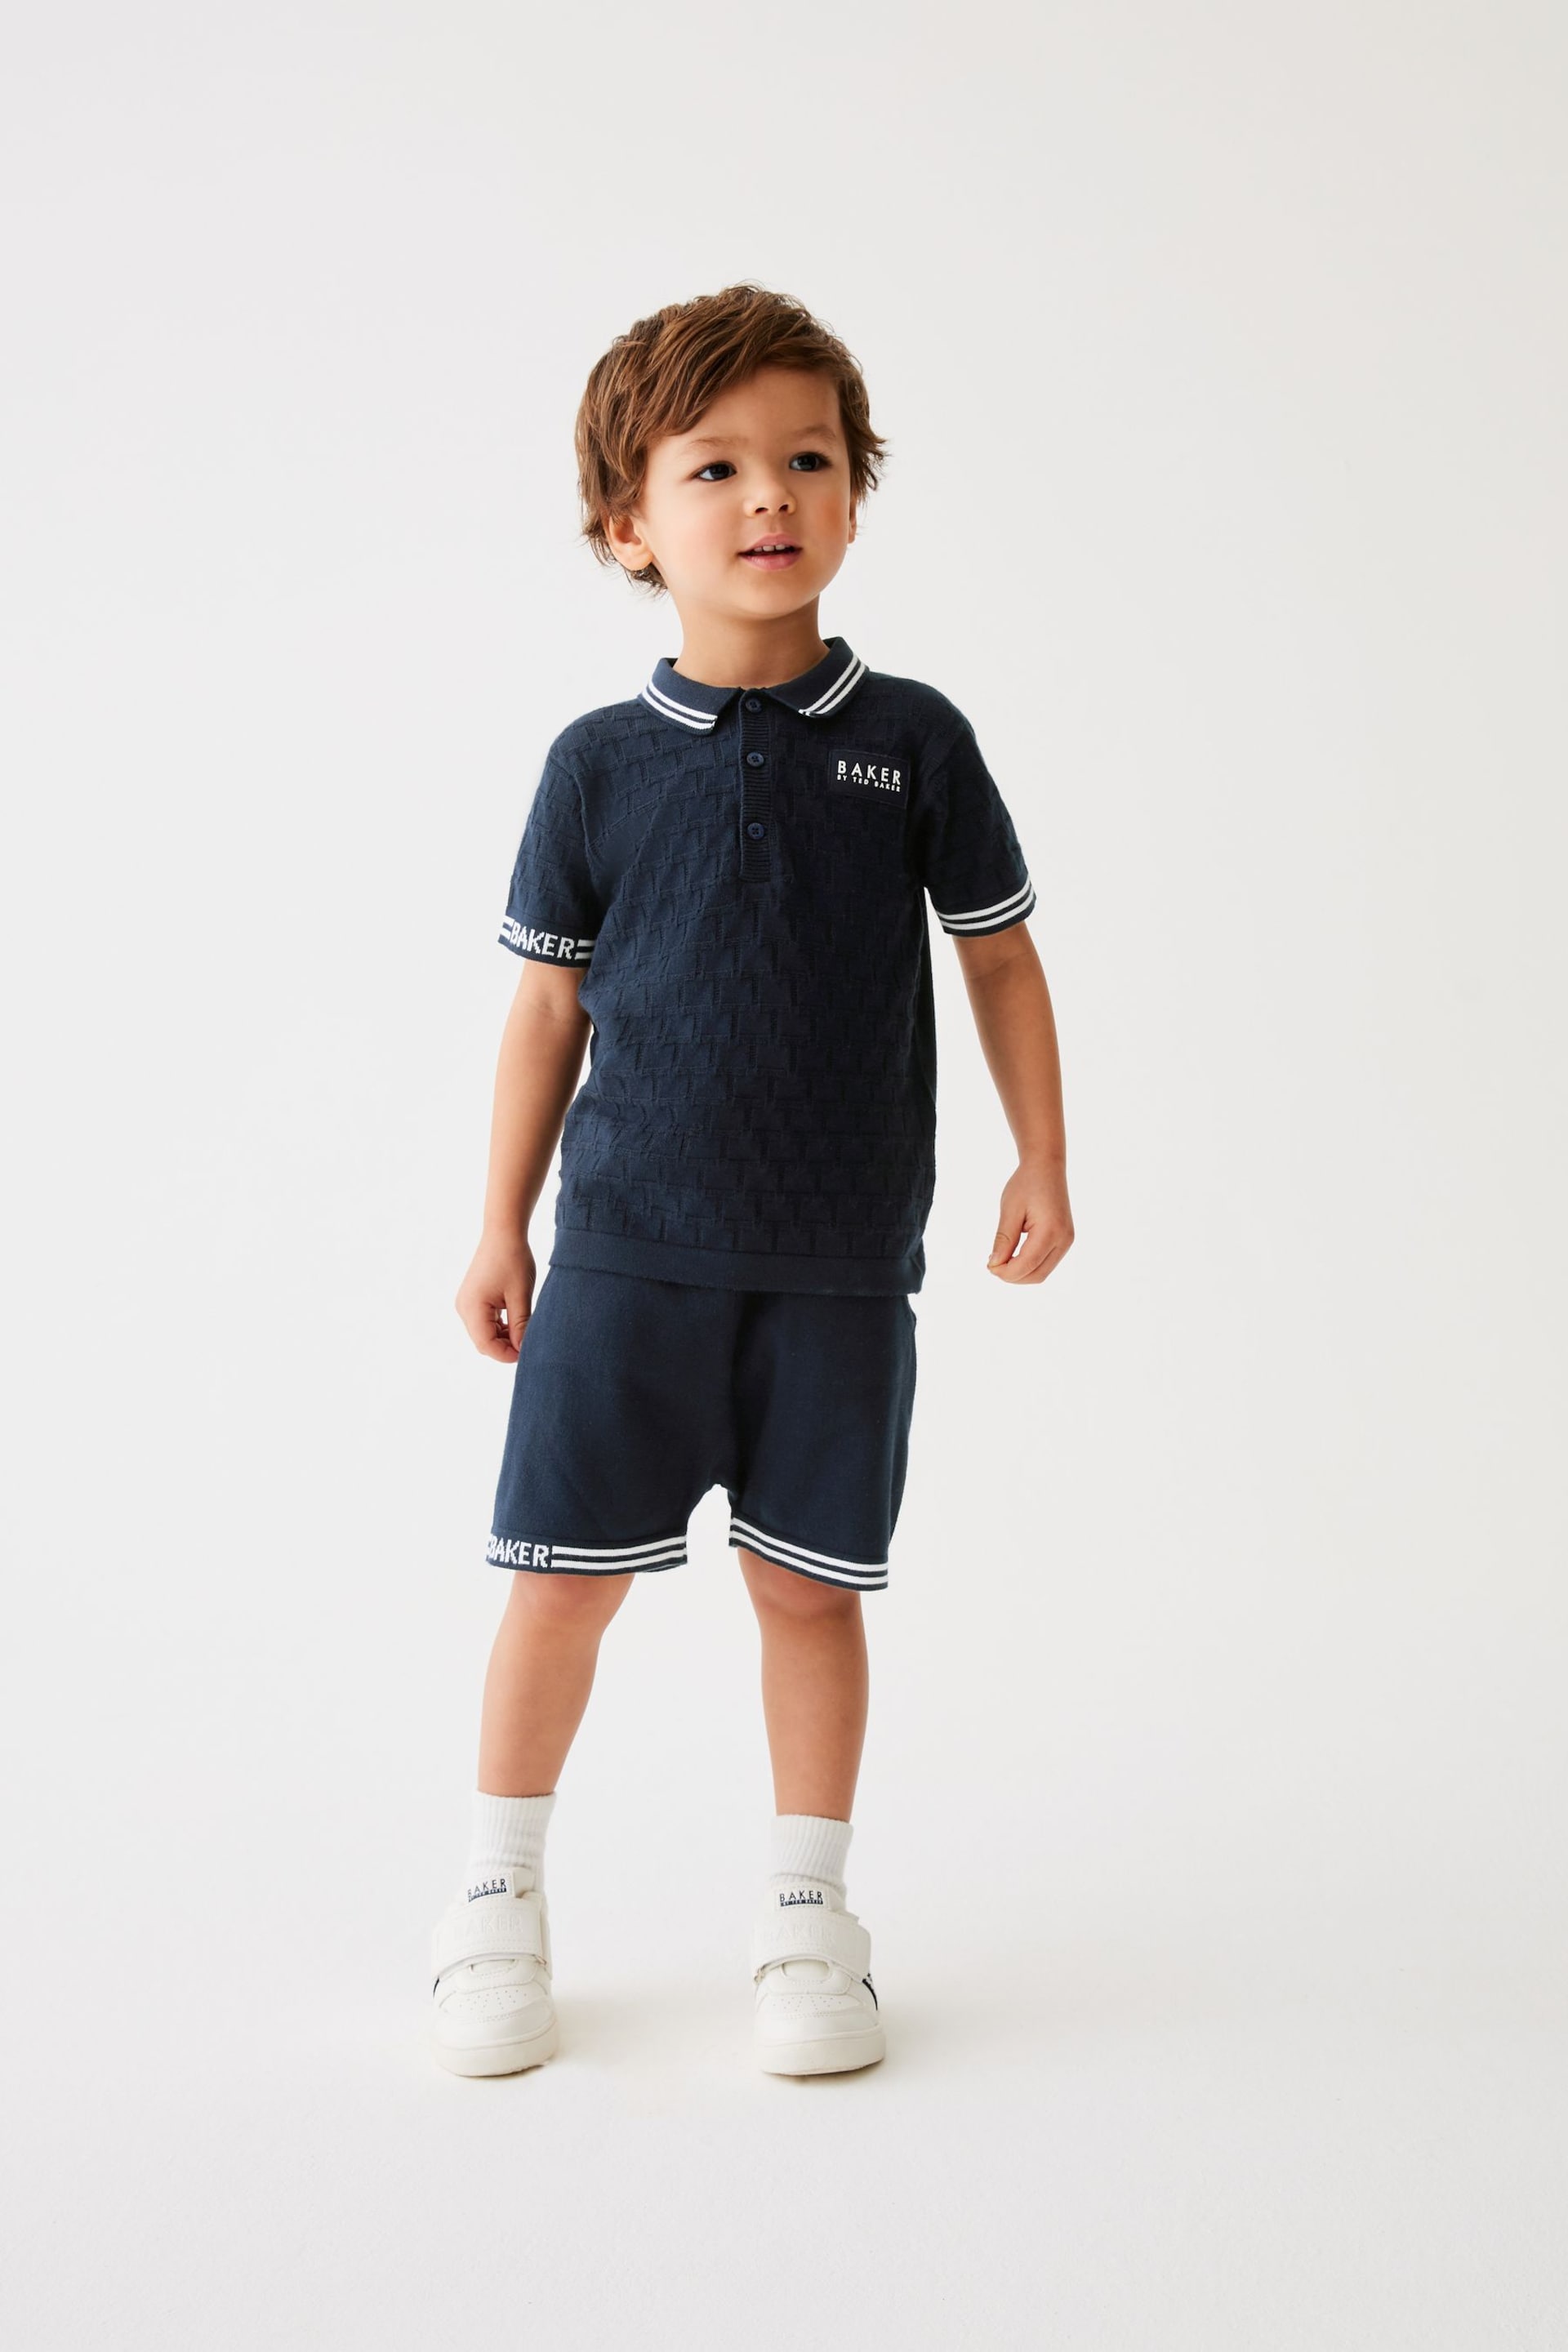 Baker by Ted Baker Knitted Polo Shirt and Short Set - Image 1 of 9